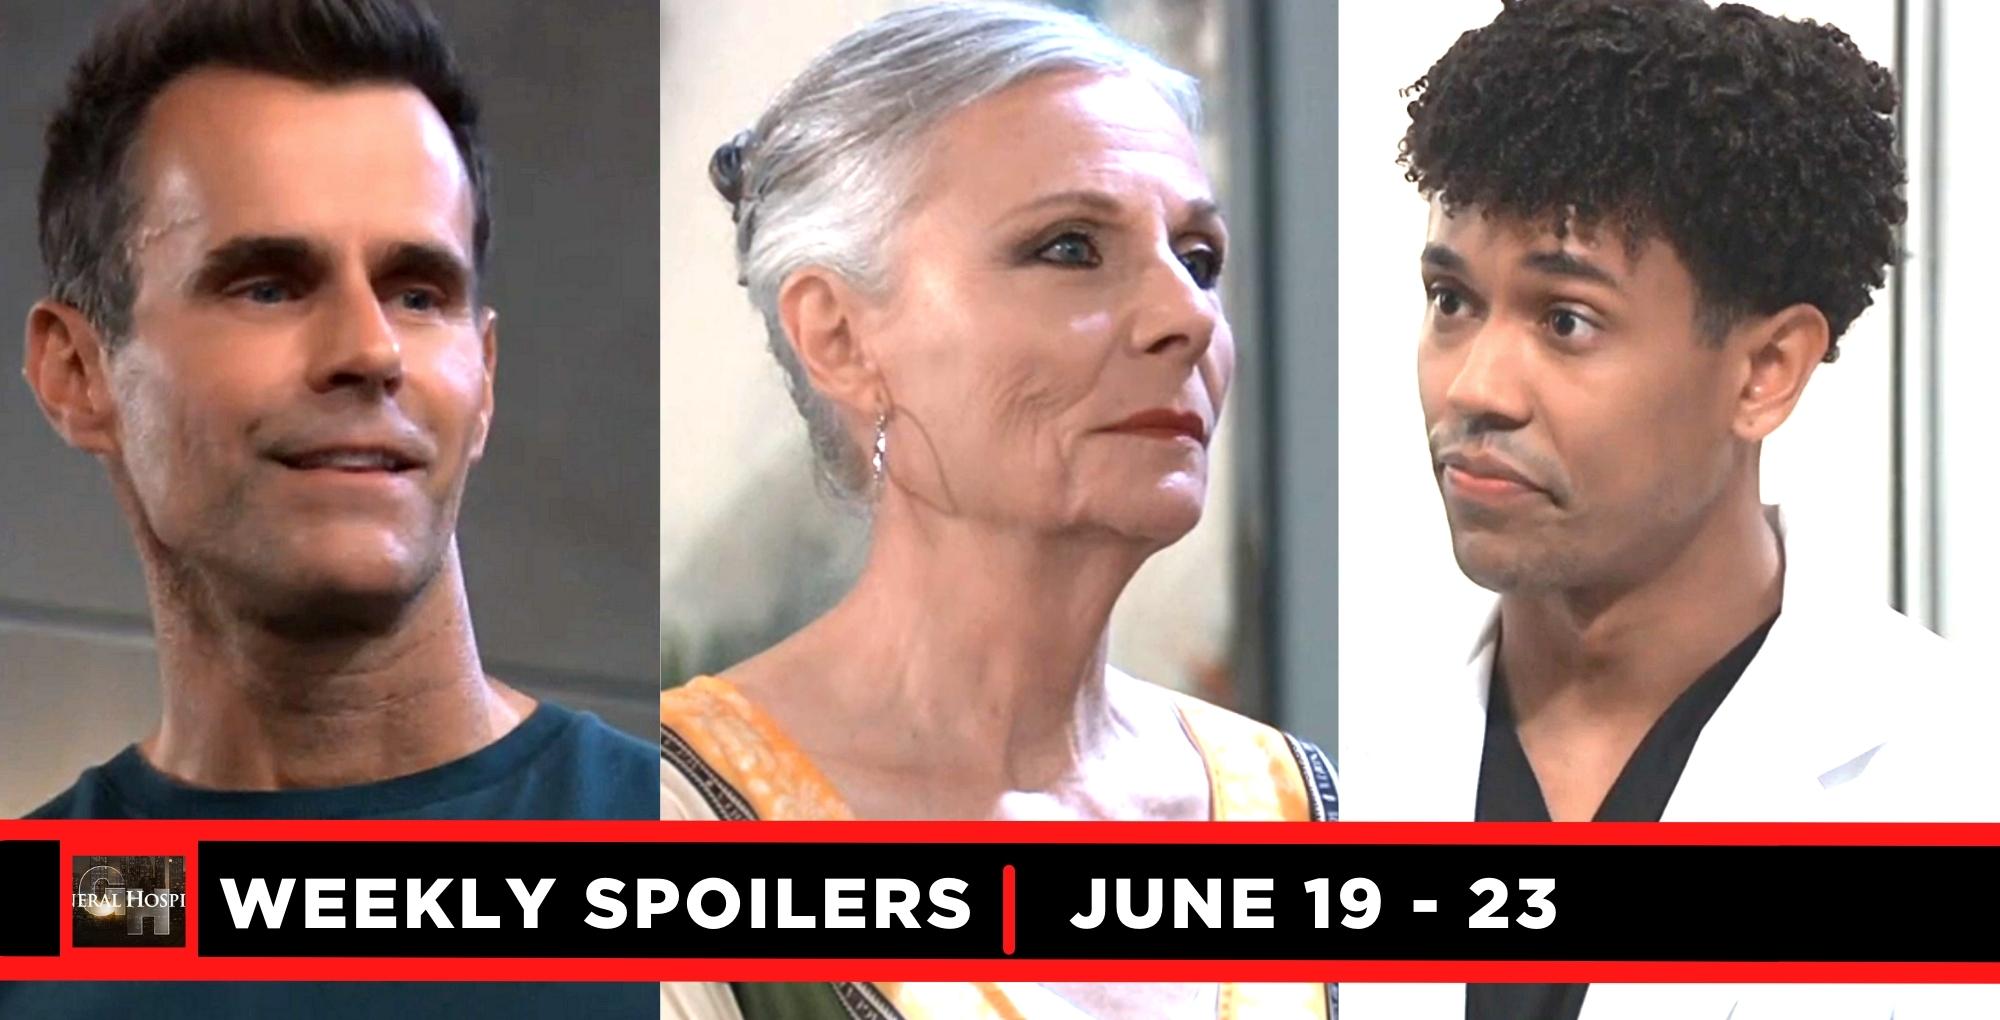 general hospital spoilers for june 19 – june 23, 2023, three images drew, tracy, and tj.